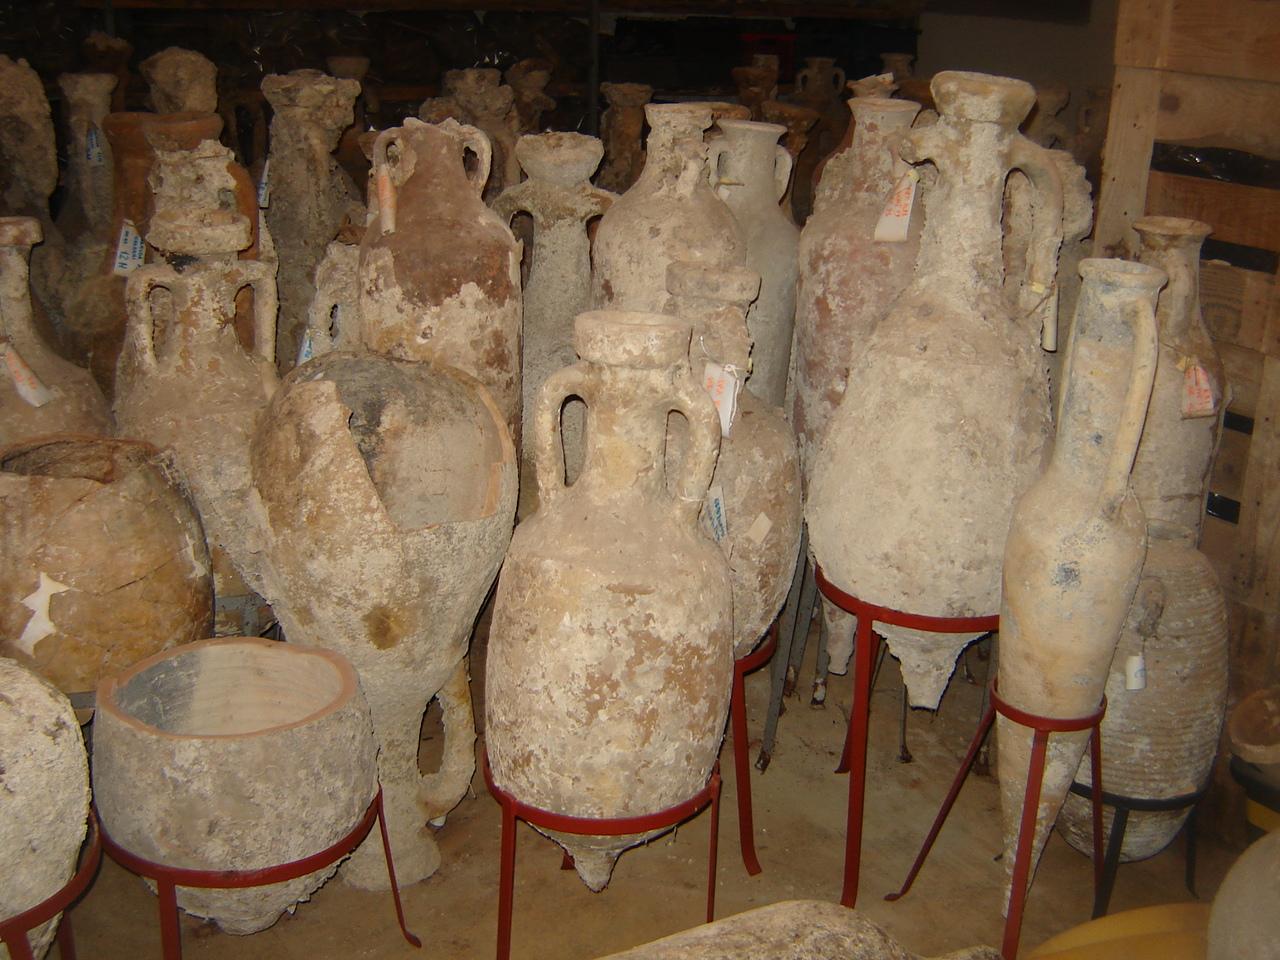  Amphora at the conservation laboratory in Zadar